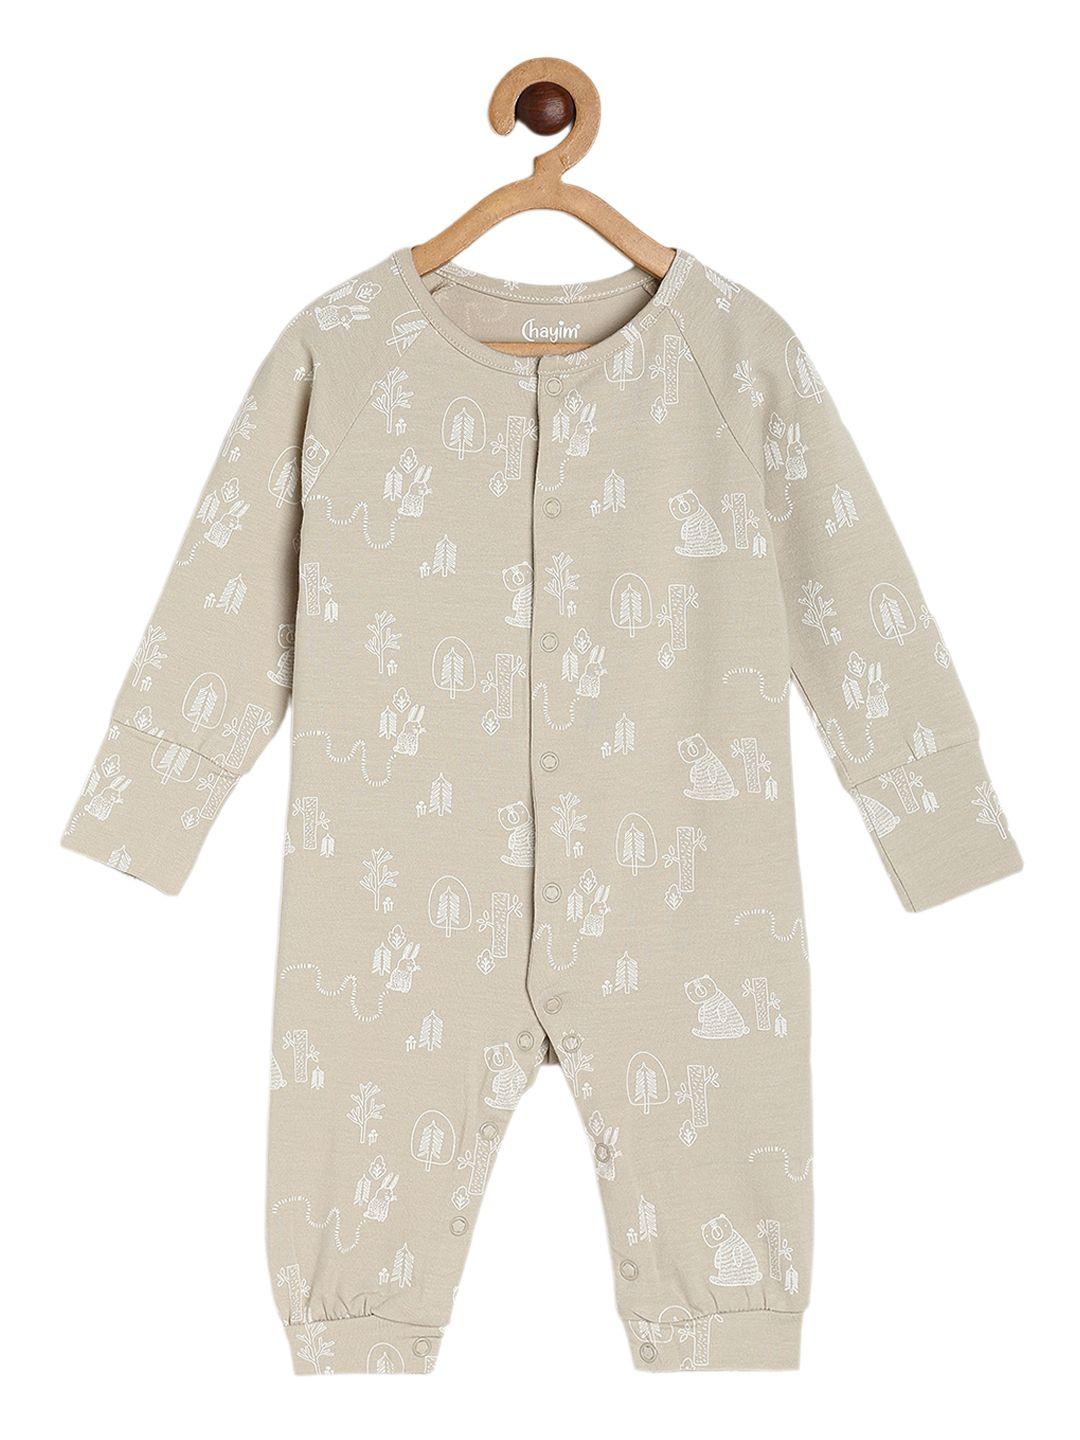 chayim-infant-printed-open-front-rompers